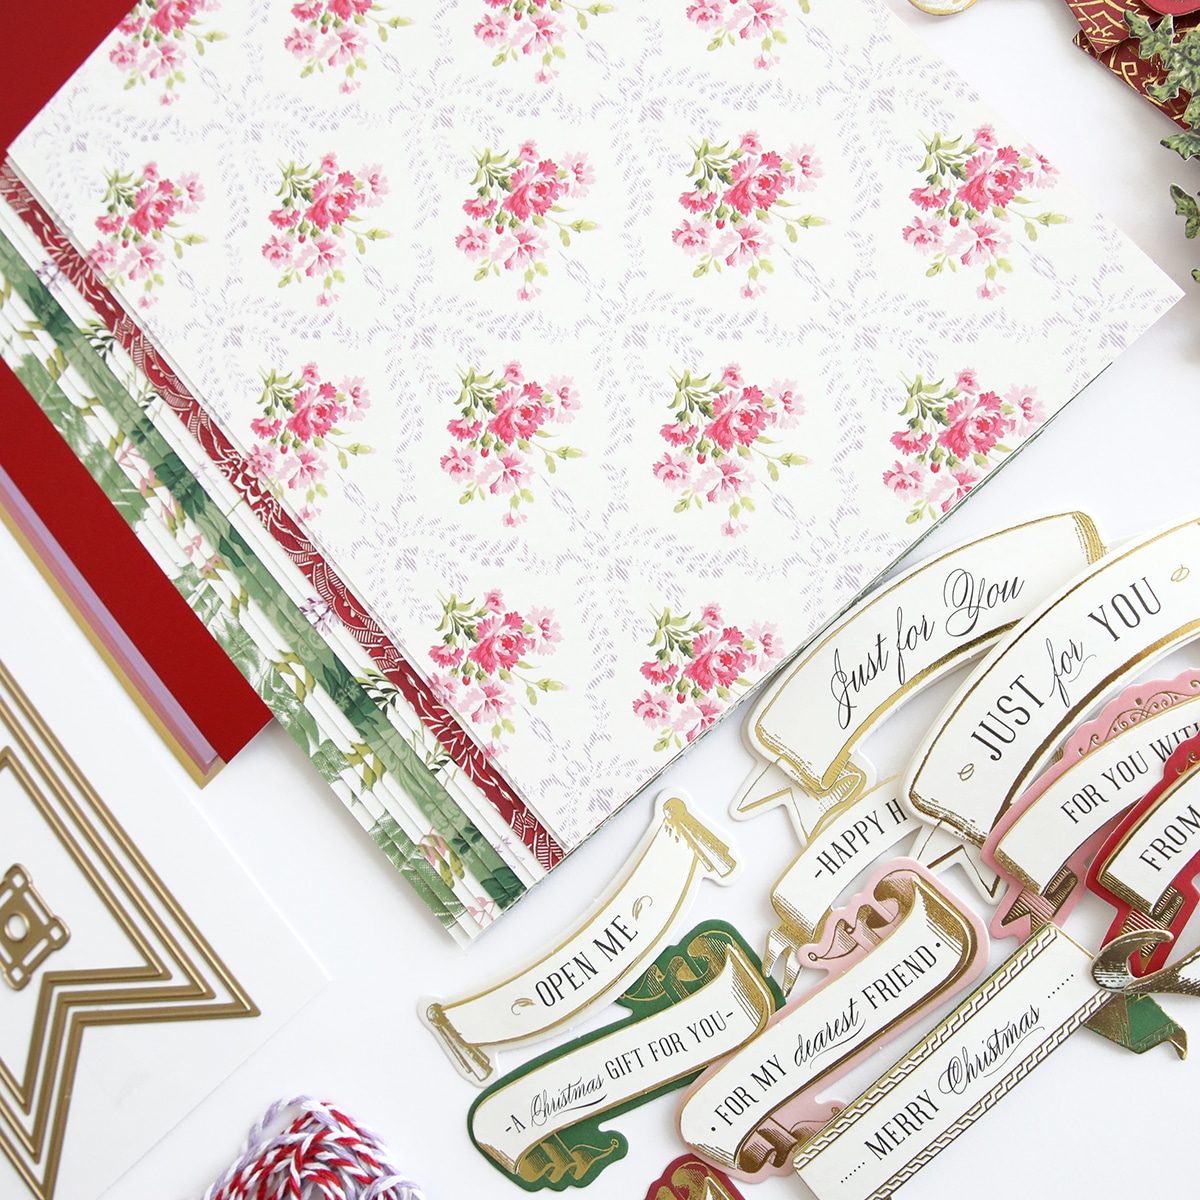 A collection of christmas papers and decorations on a table.